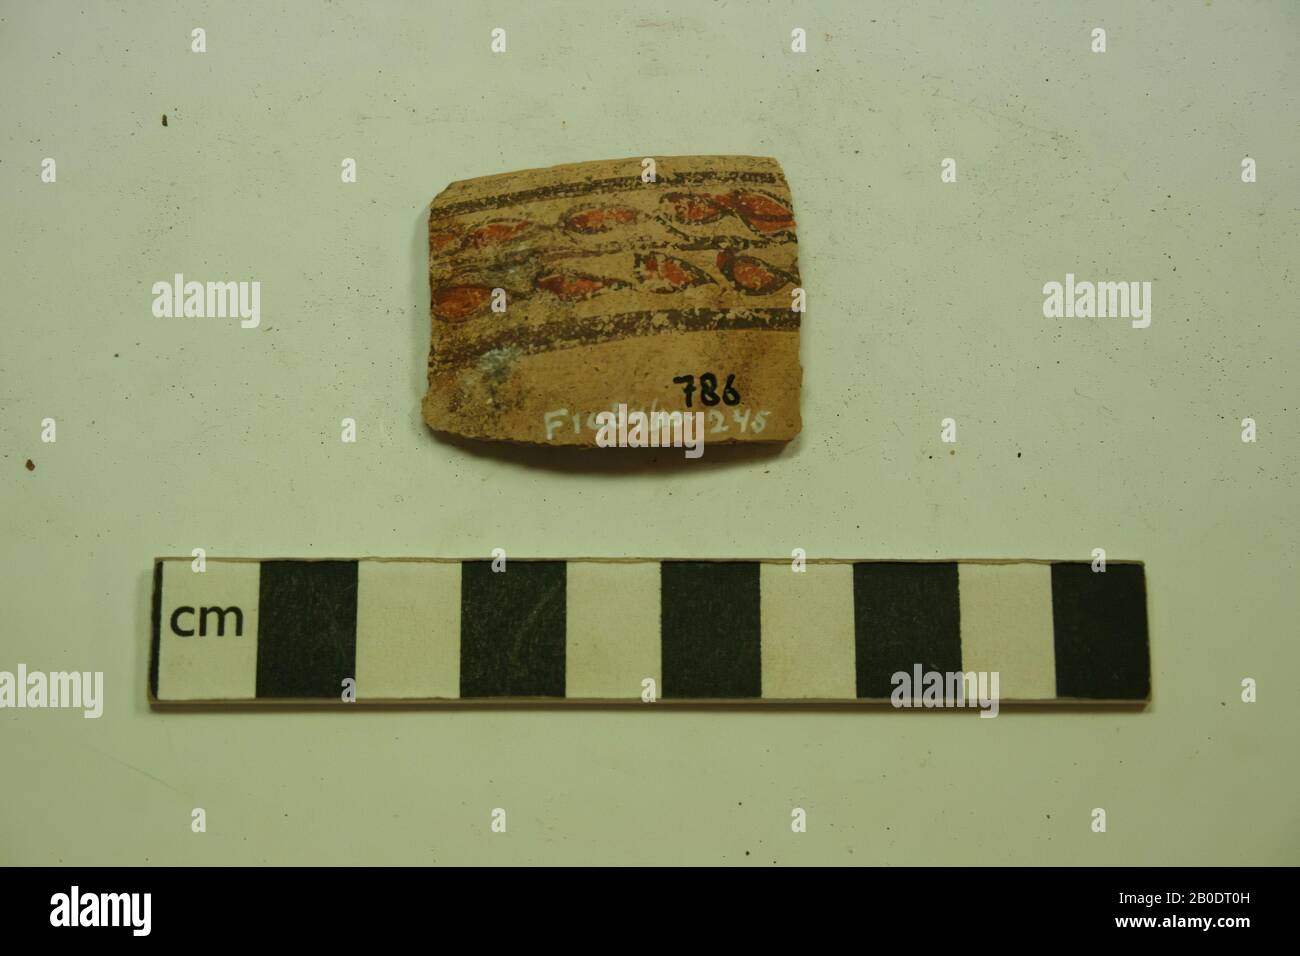 Egypt, shard, earthenware, 4 x 3 cm thick 3 mm, Meroitic Period, 2nd-4th century A.D, Egypt Stock Photo